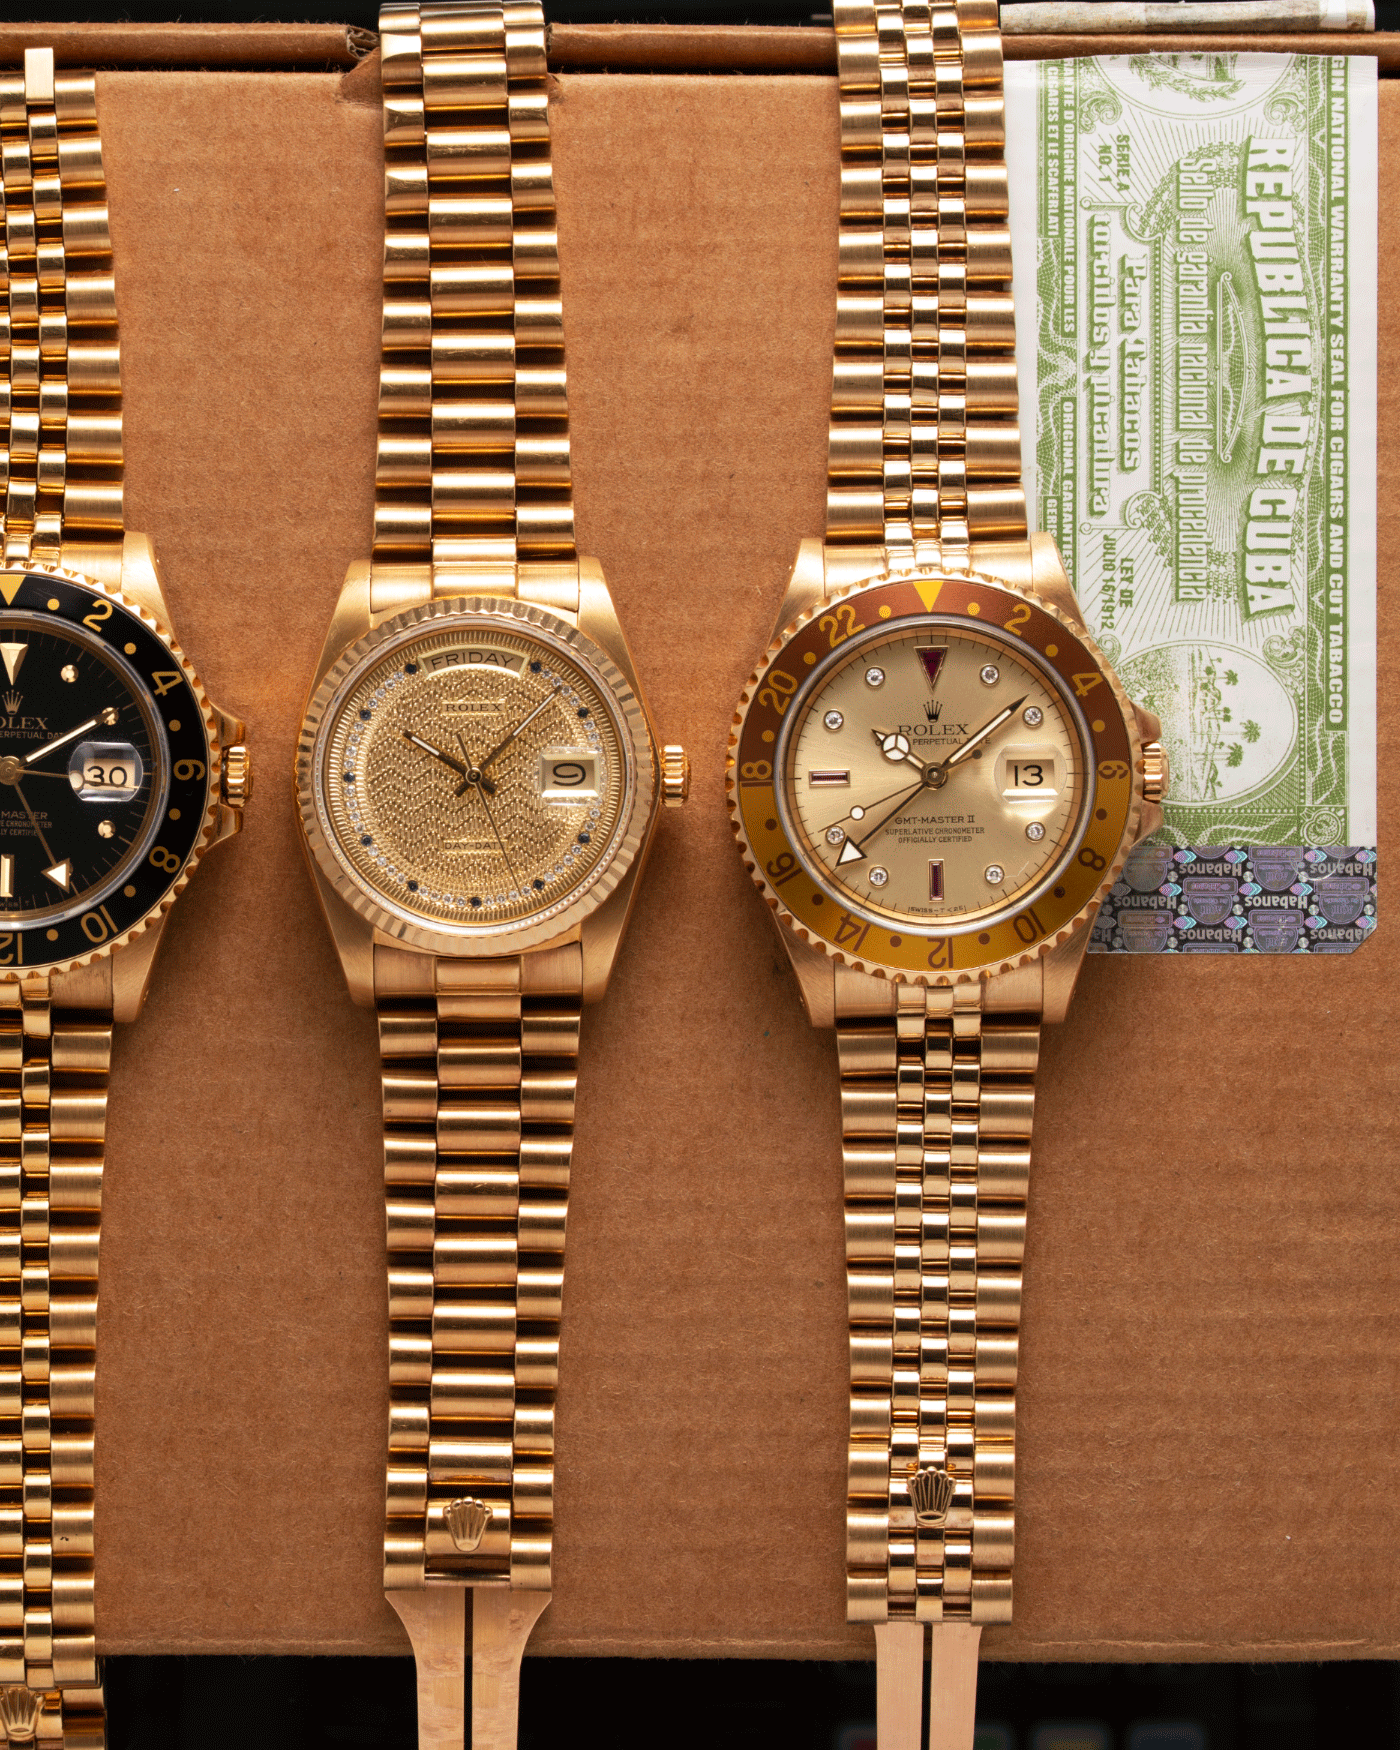 Brand: Rolex Year: 1990 Model: GMT-Master Reference Number: 167187 Serial Number: E Serial Material: 18k Yellow Gold Movement: Cal. 3185 Case Diameter: 40mm Lug Width: 20mm Strap: 18k Yellow Gold Rolex 8386 Jubilee Bracelet with ’47B’ End Links